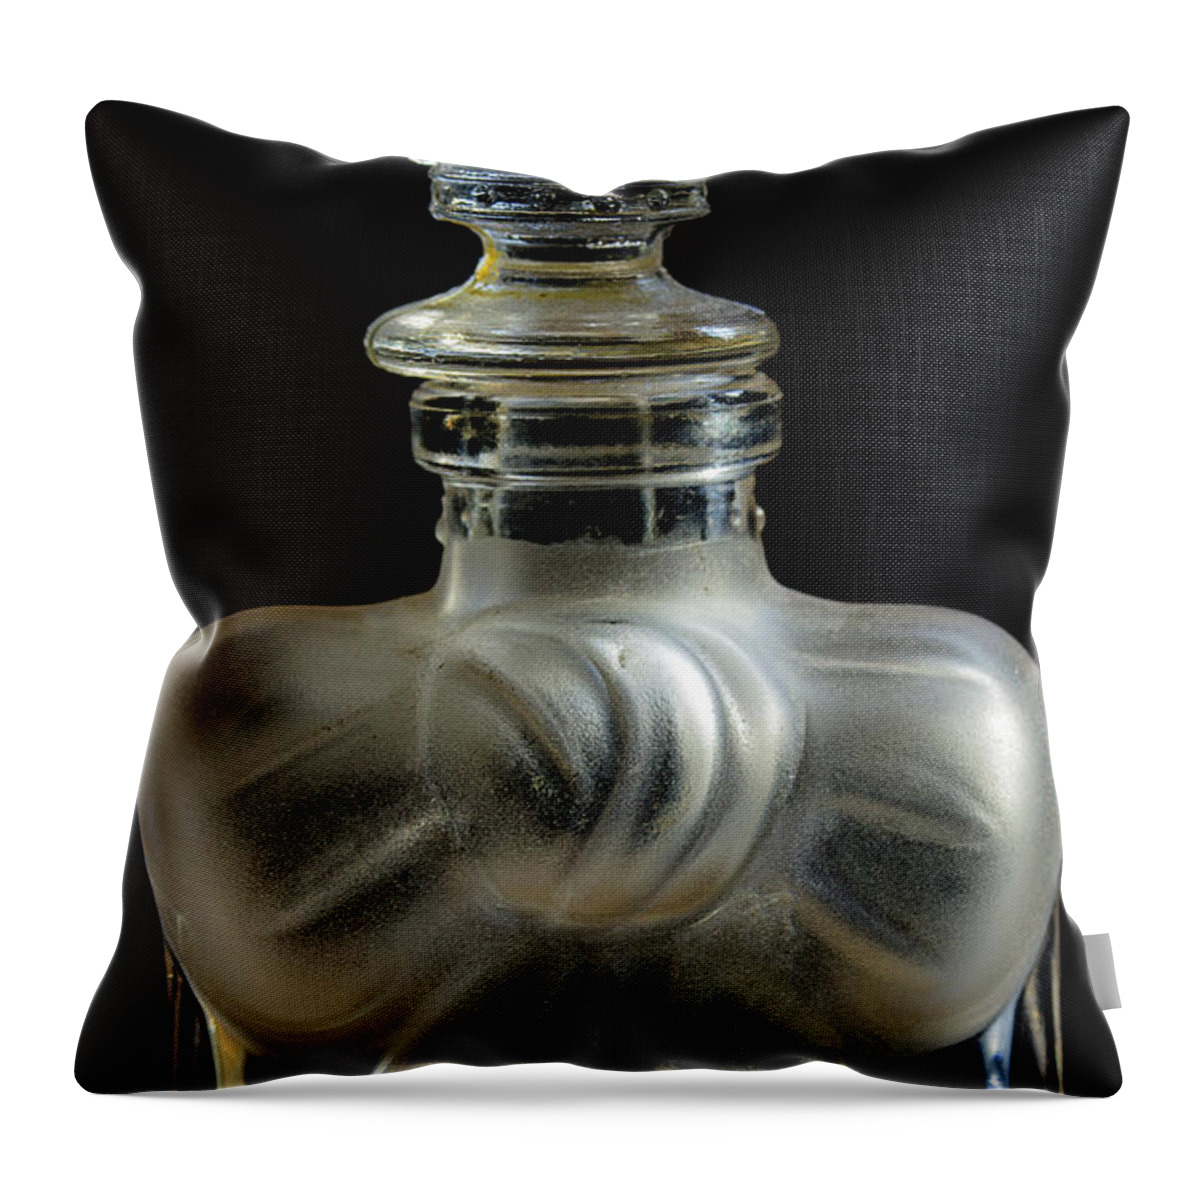 Bottle Throw Pillow featuring the photograph Perfume Bottle by Mike Eingle